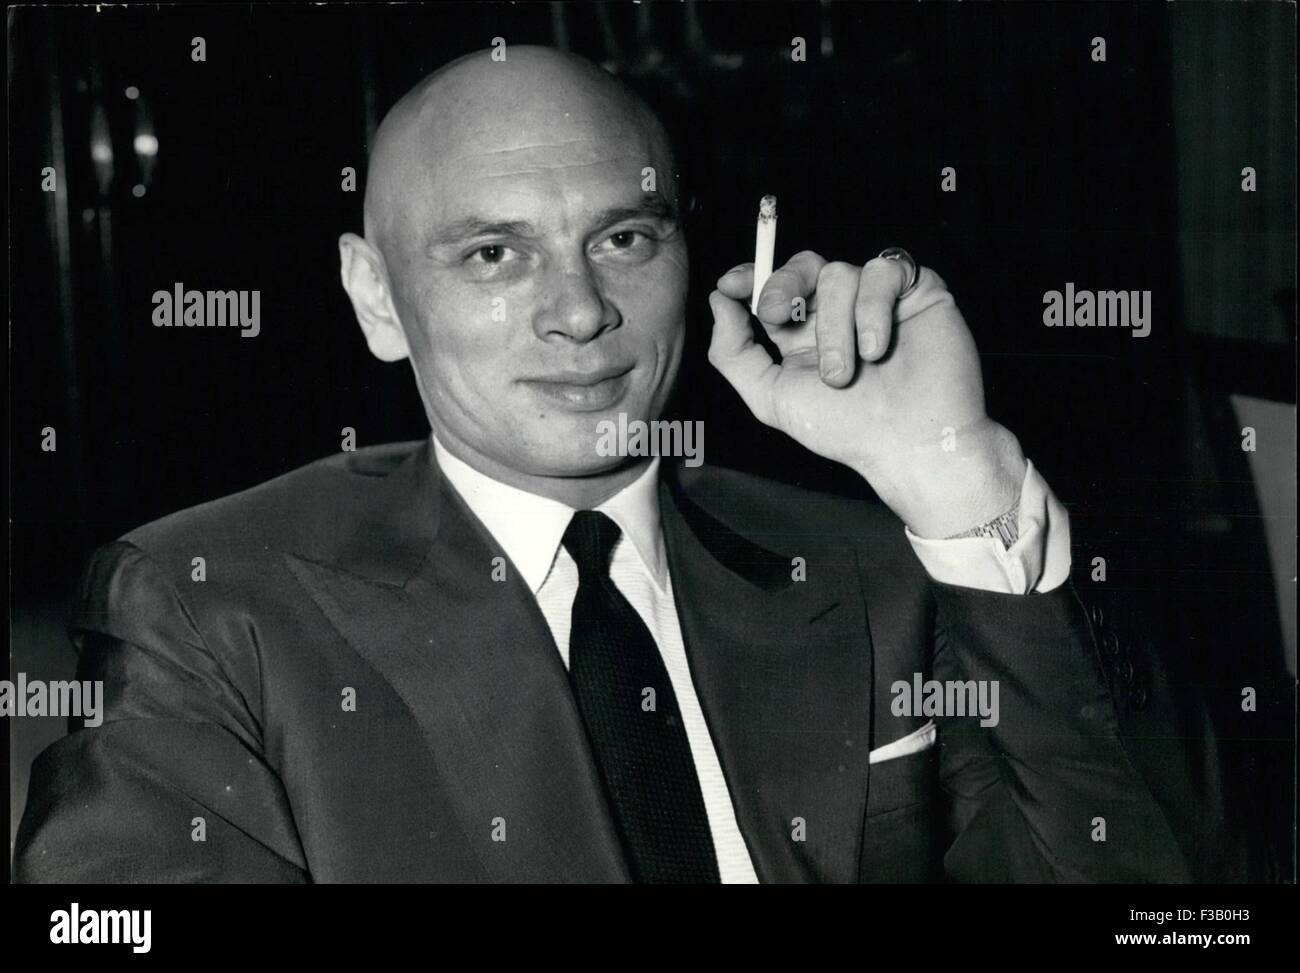 Paris. 19th Feb, 1958. Yul Brynner who is co-starring with Charlton Heston in Cecile De Mille 'Ten Commandments' is now in Paris. Yul Brynner during his press conference at the Hotel Plaza Athenee. © Keystone Pictures USA/ZUMAPRESS.com/Alamy Live News Stock Photo